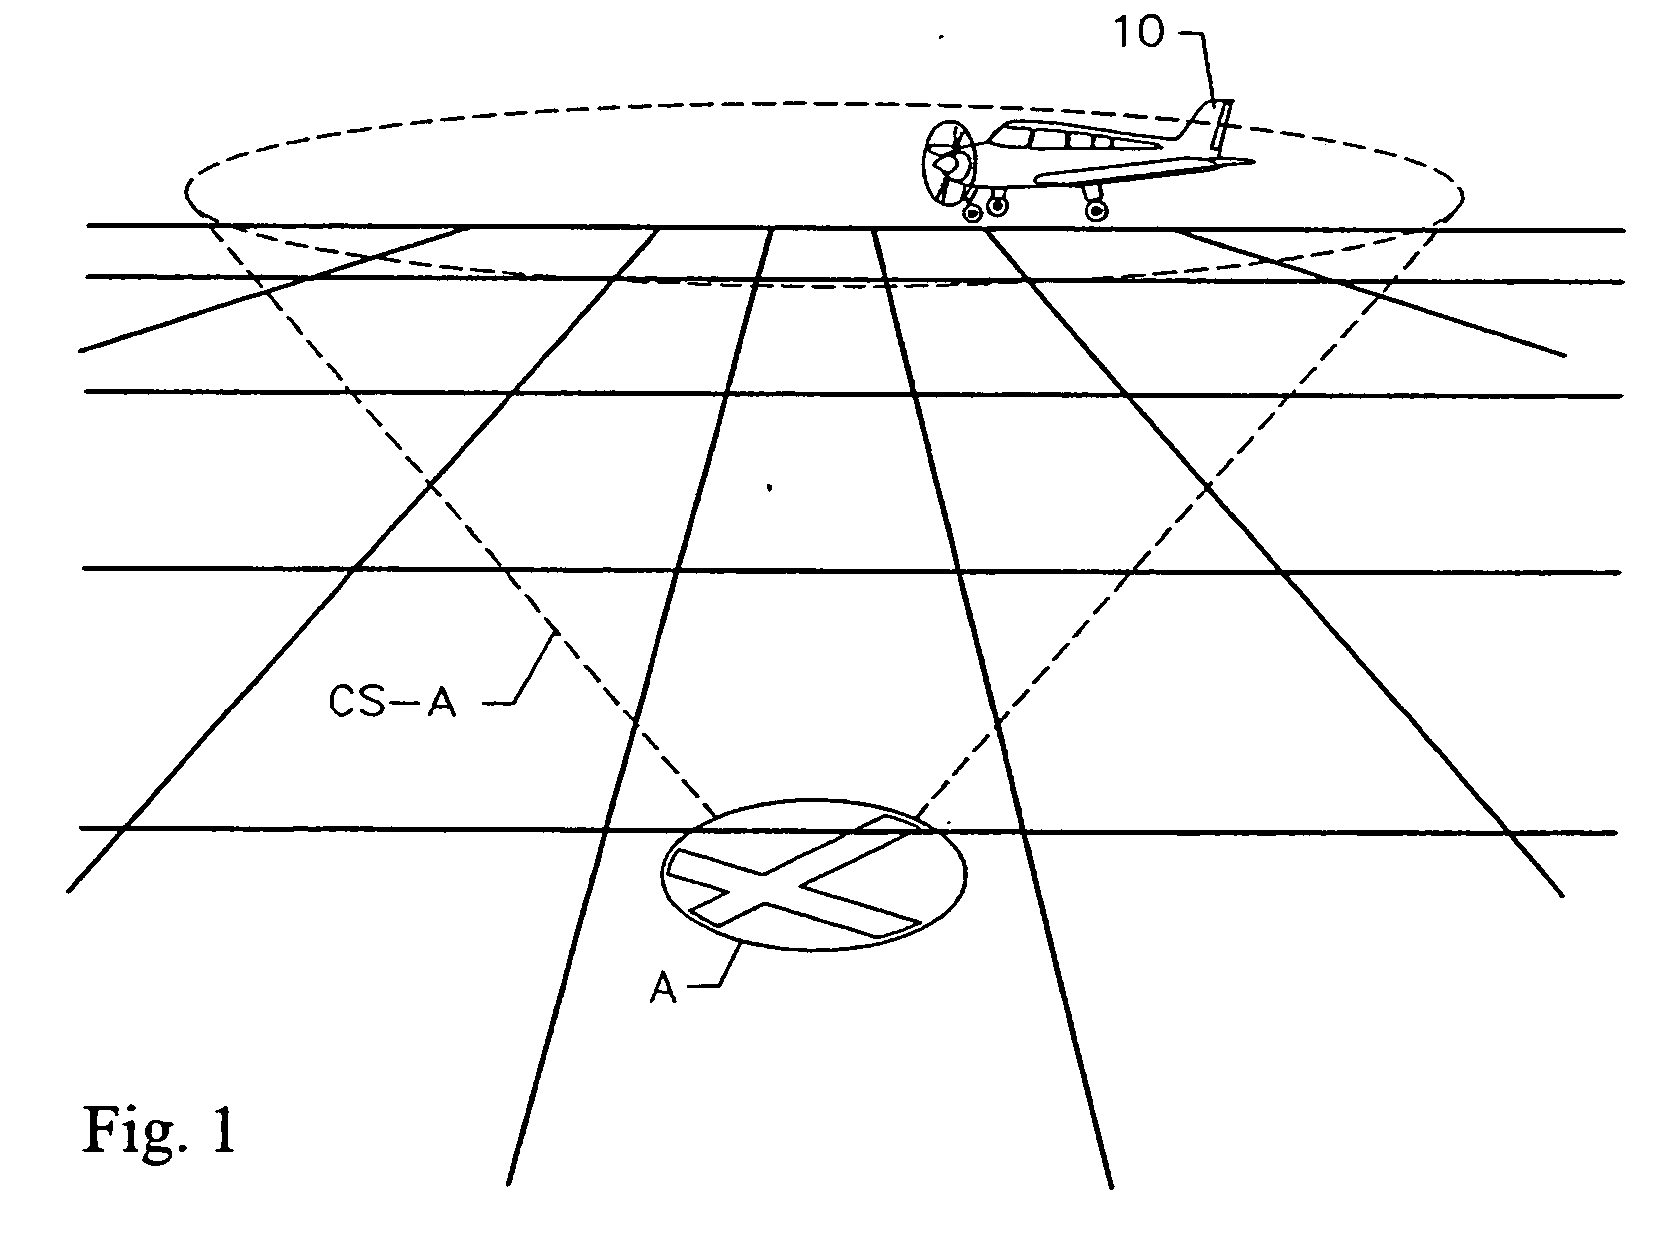 Flight management system and method for providing navigational reference to emergency landing locations